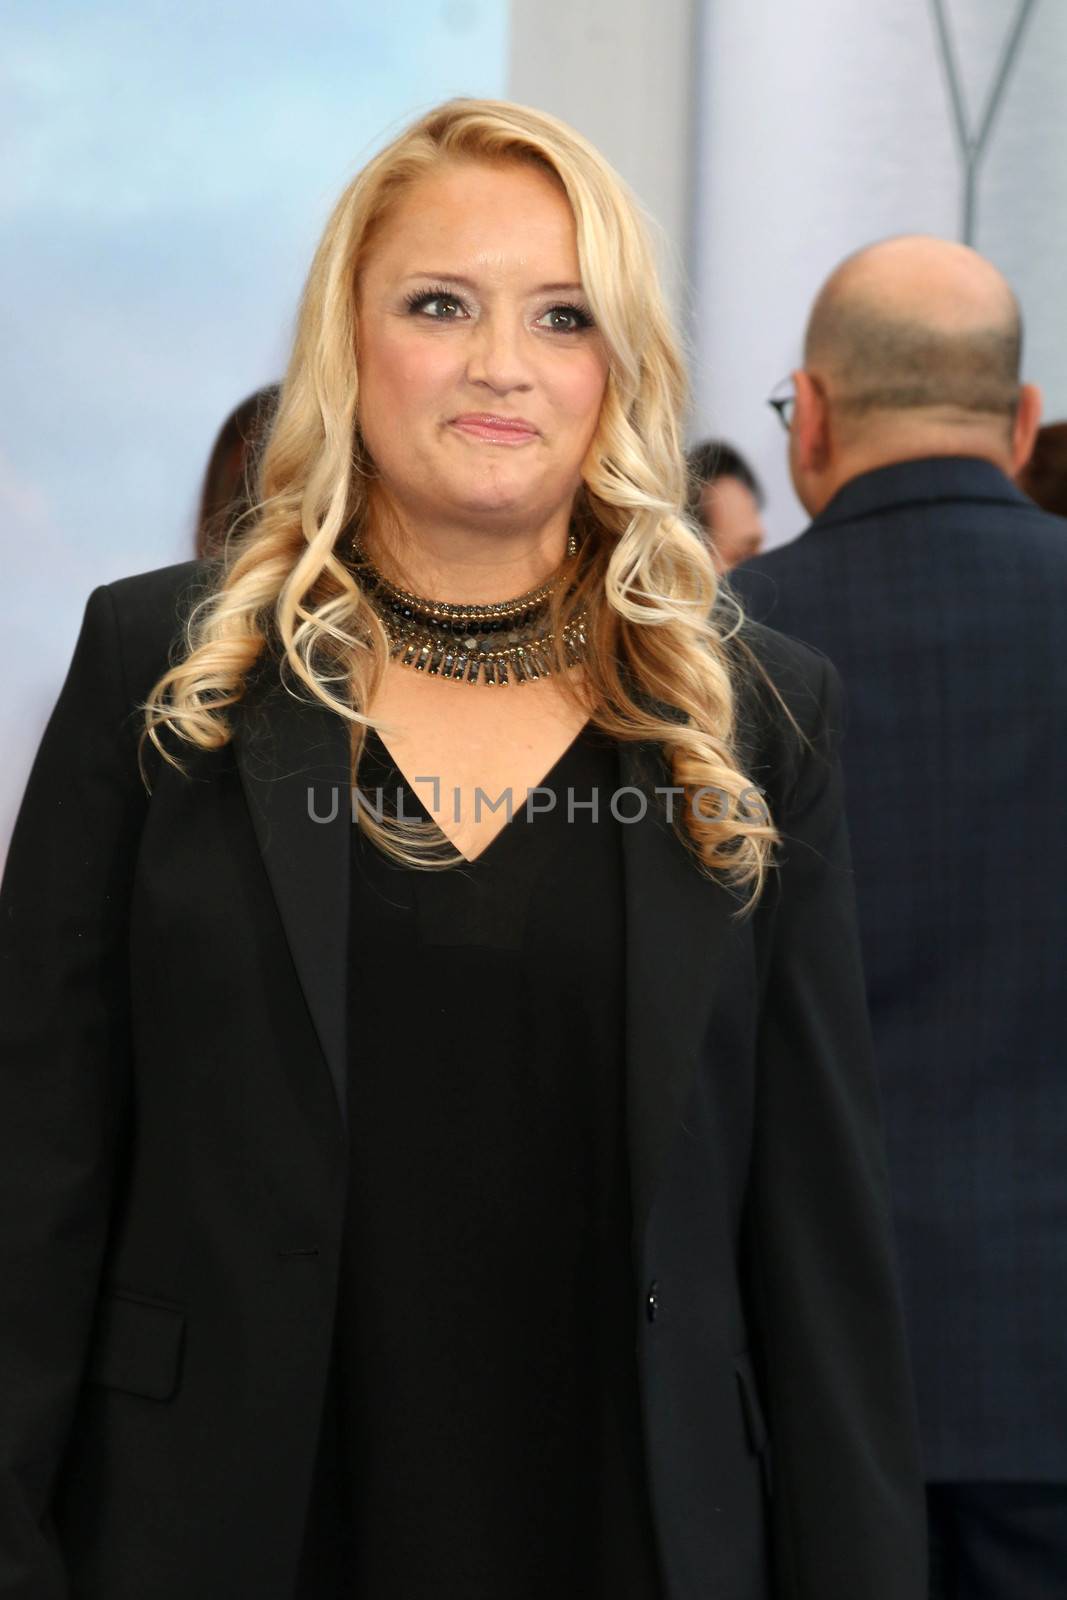 Lucy Walker
at the "Wonder Woman" Premiere, Pantages, Hollywood, CA 05-25-17/ImageCollect by ImageCollect